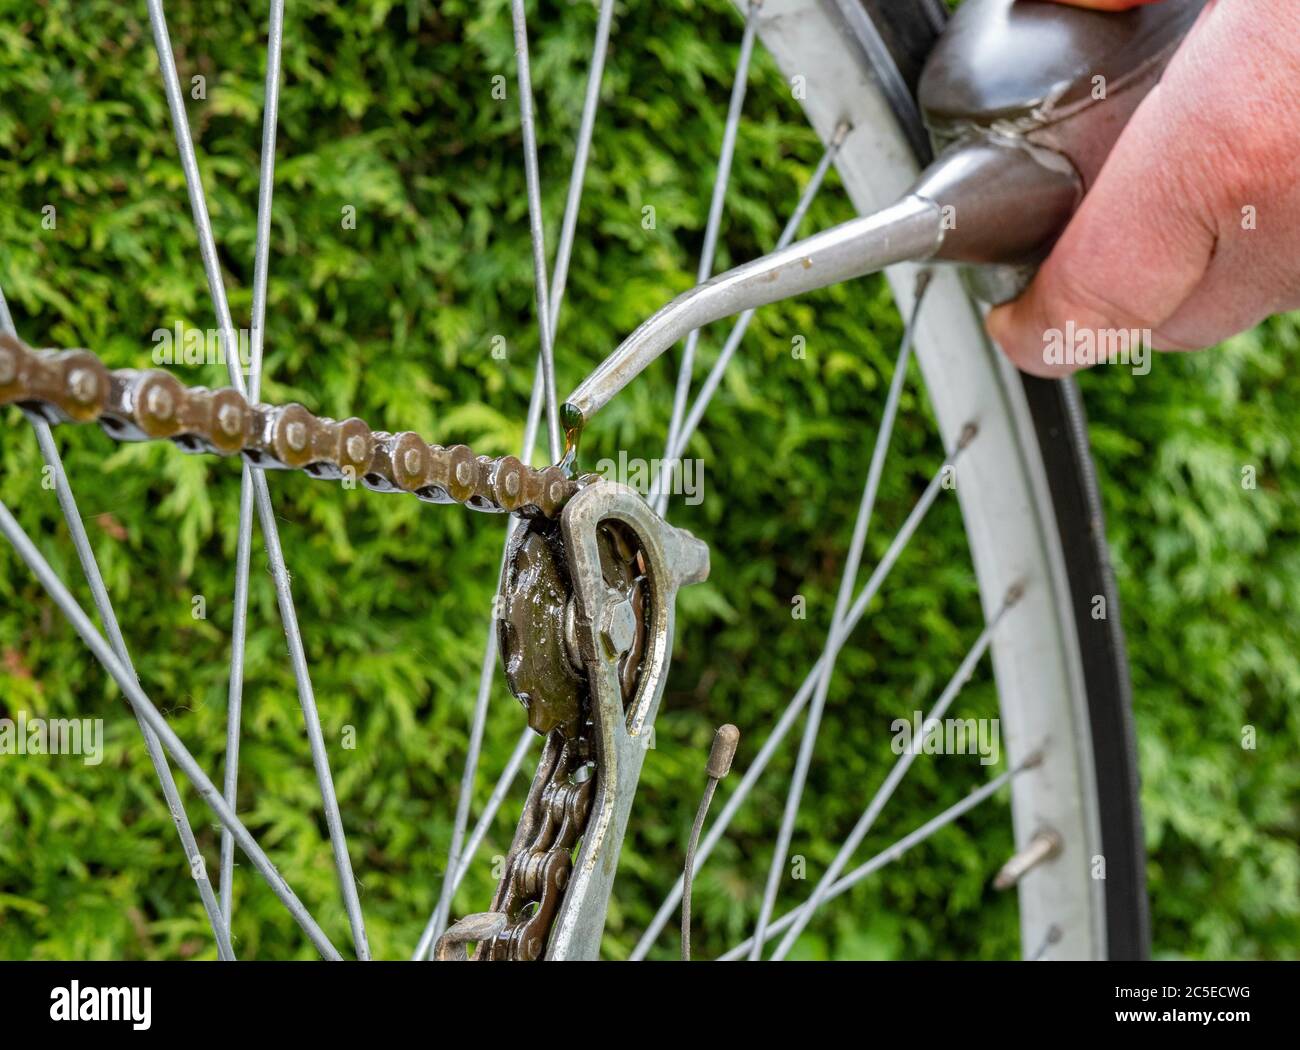 Closeup of a man’s hand pouring a trickle of oil from an old can with a narrow spout, onto the chain and cog of a bicycle, to lubricate the mechanism. Stock Photo